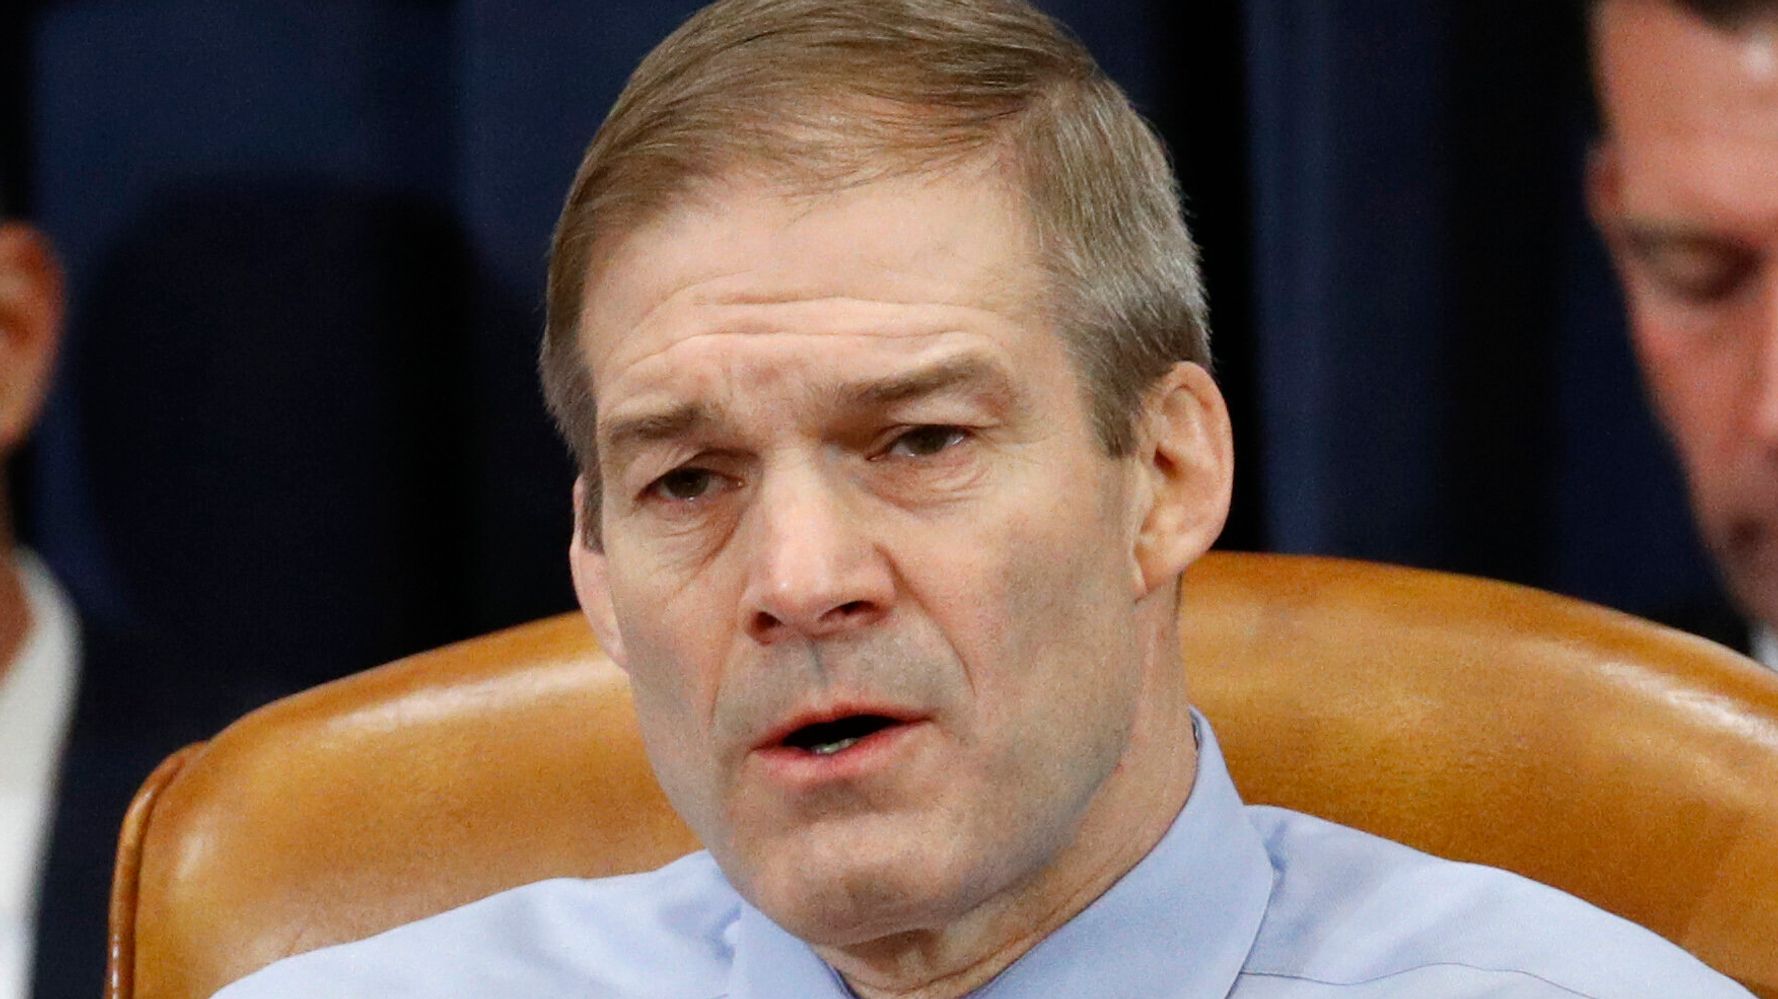 Rep. Jim Jordan's Question About Democrats Gets Turned Into A Punchline About Him